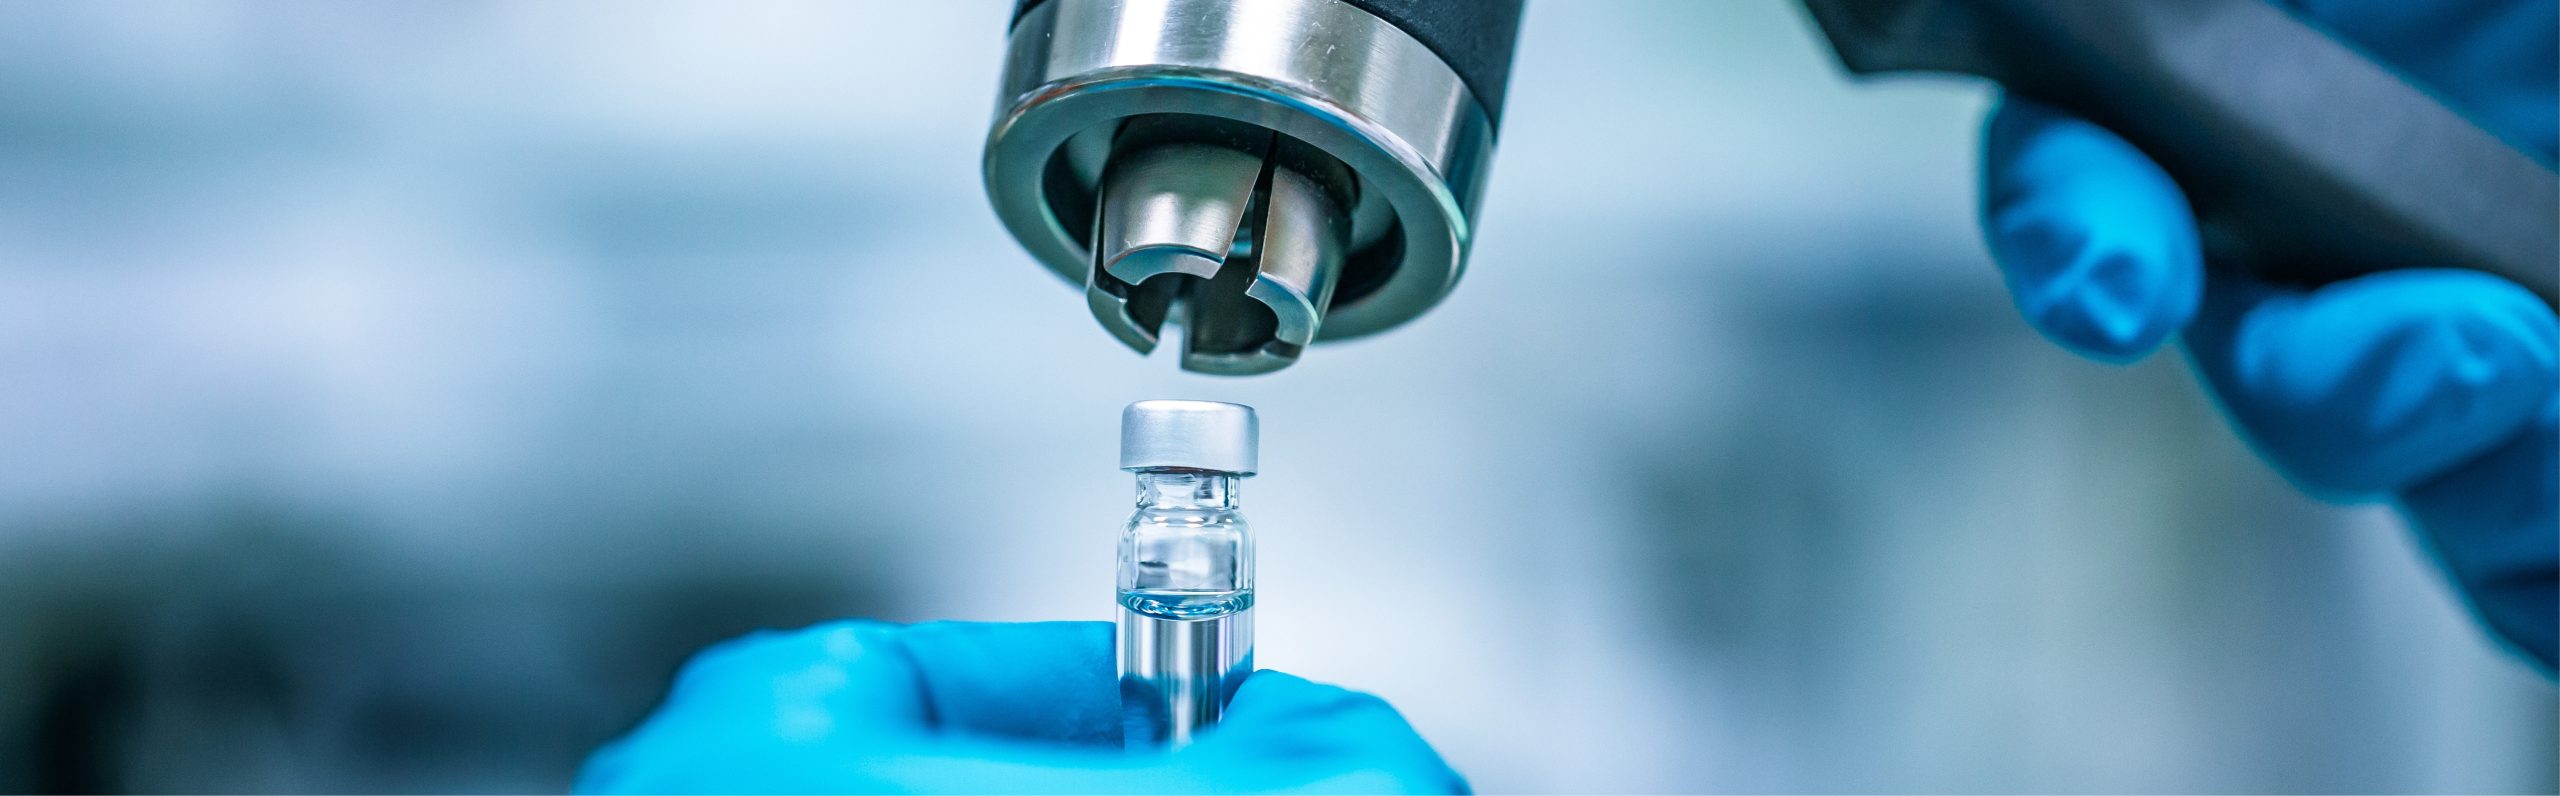 Production of a vial in a laboratory showcasing Good Manufacturing Practice (GMP) standards and quality assurance. Independent GMP auditing services and system implementation support for API manufacturers and contract medicinal product facilities.